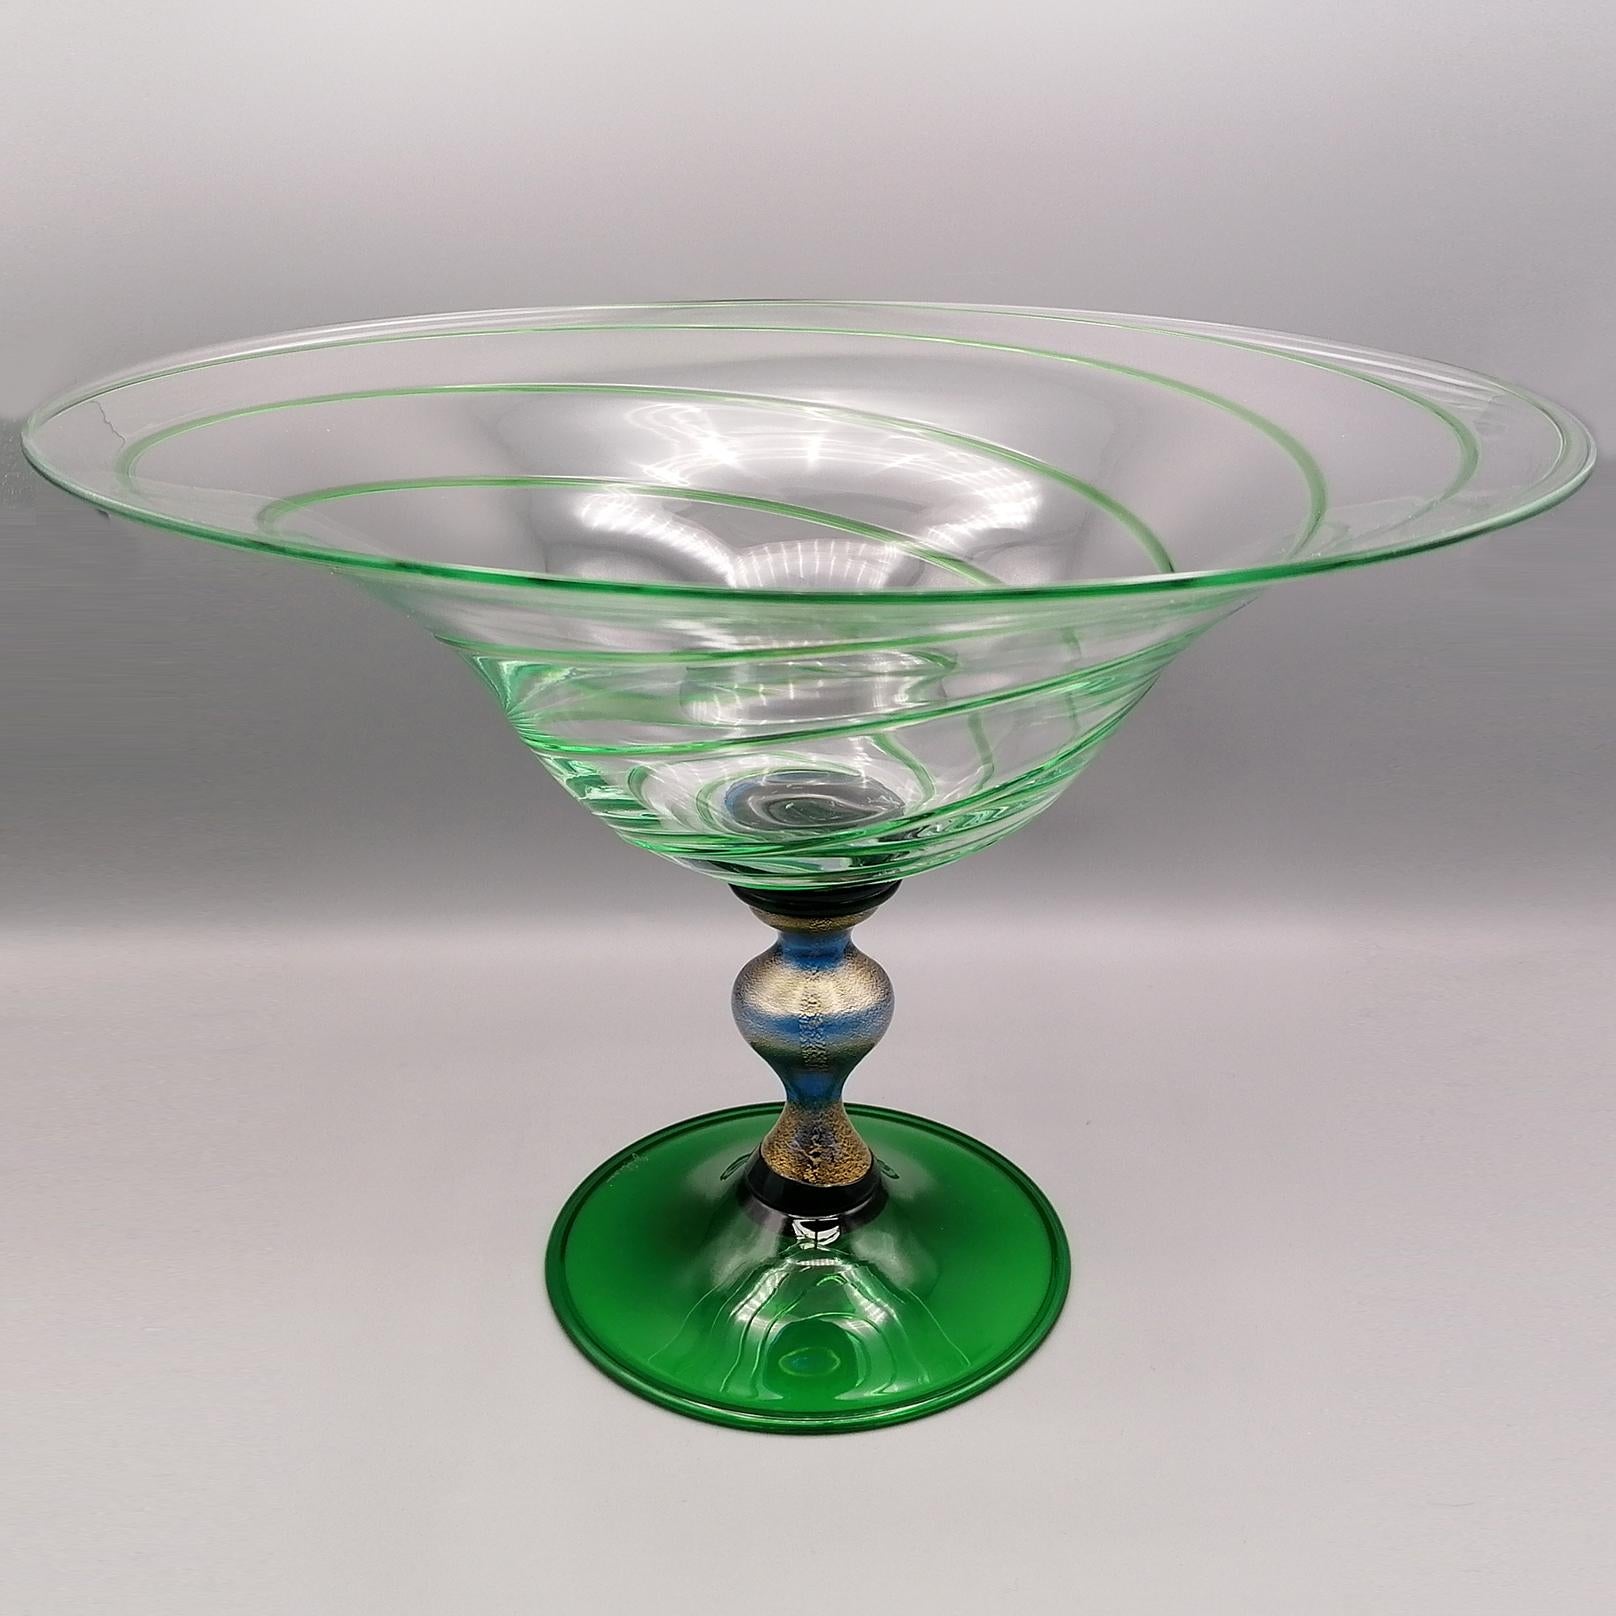 Glass centerpiece made in Murano - Venice - Italy by the Gabbiani artisan factory.
The base is green, while the stem is blue where flakes of pure gold have been inserted.
The cup is flared and made of clear glass, decorated with a green spiral